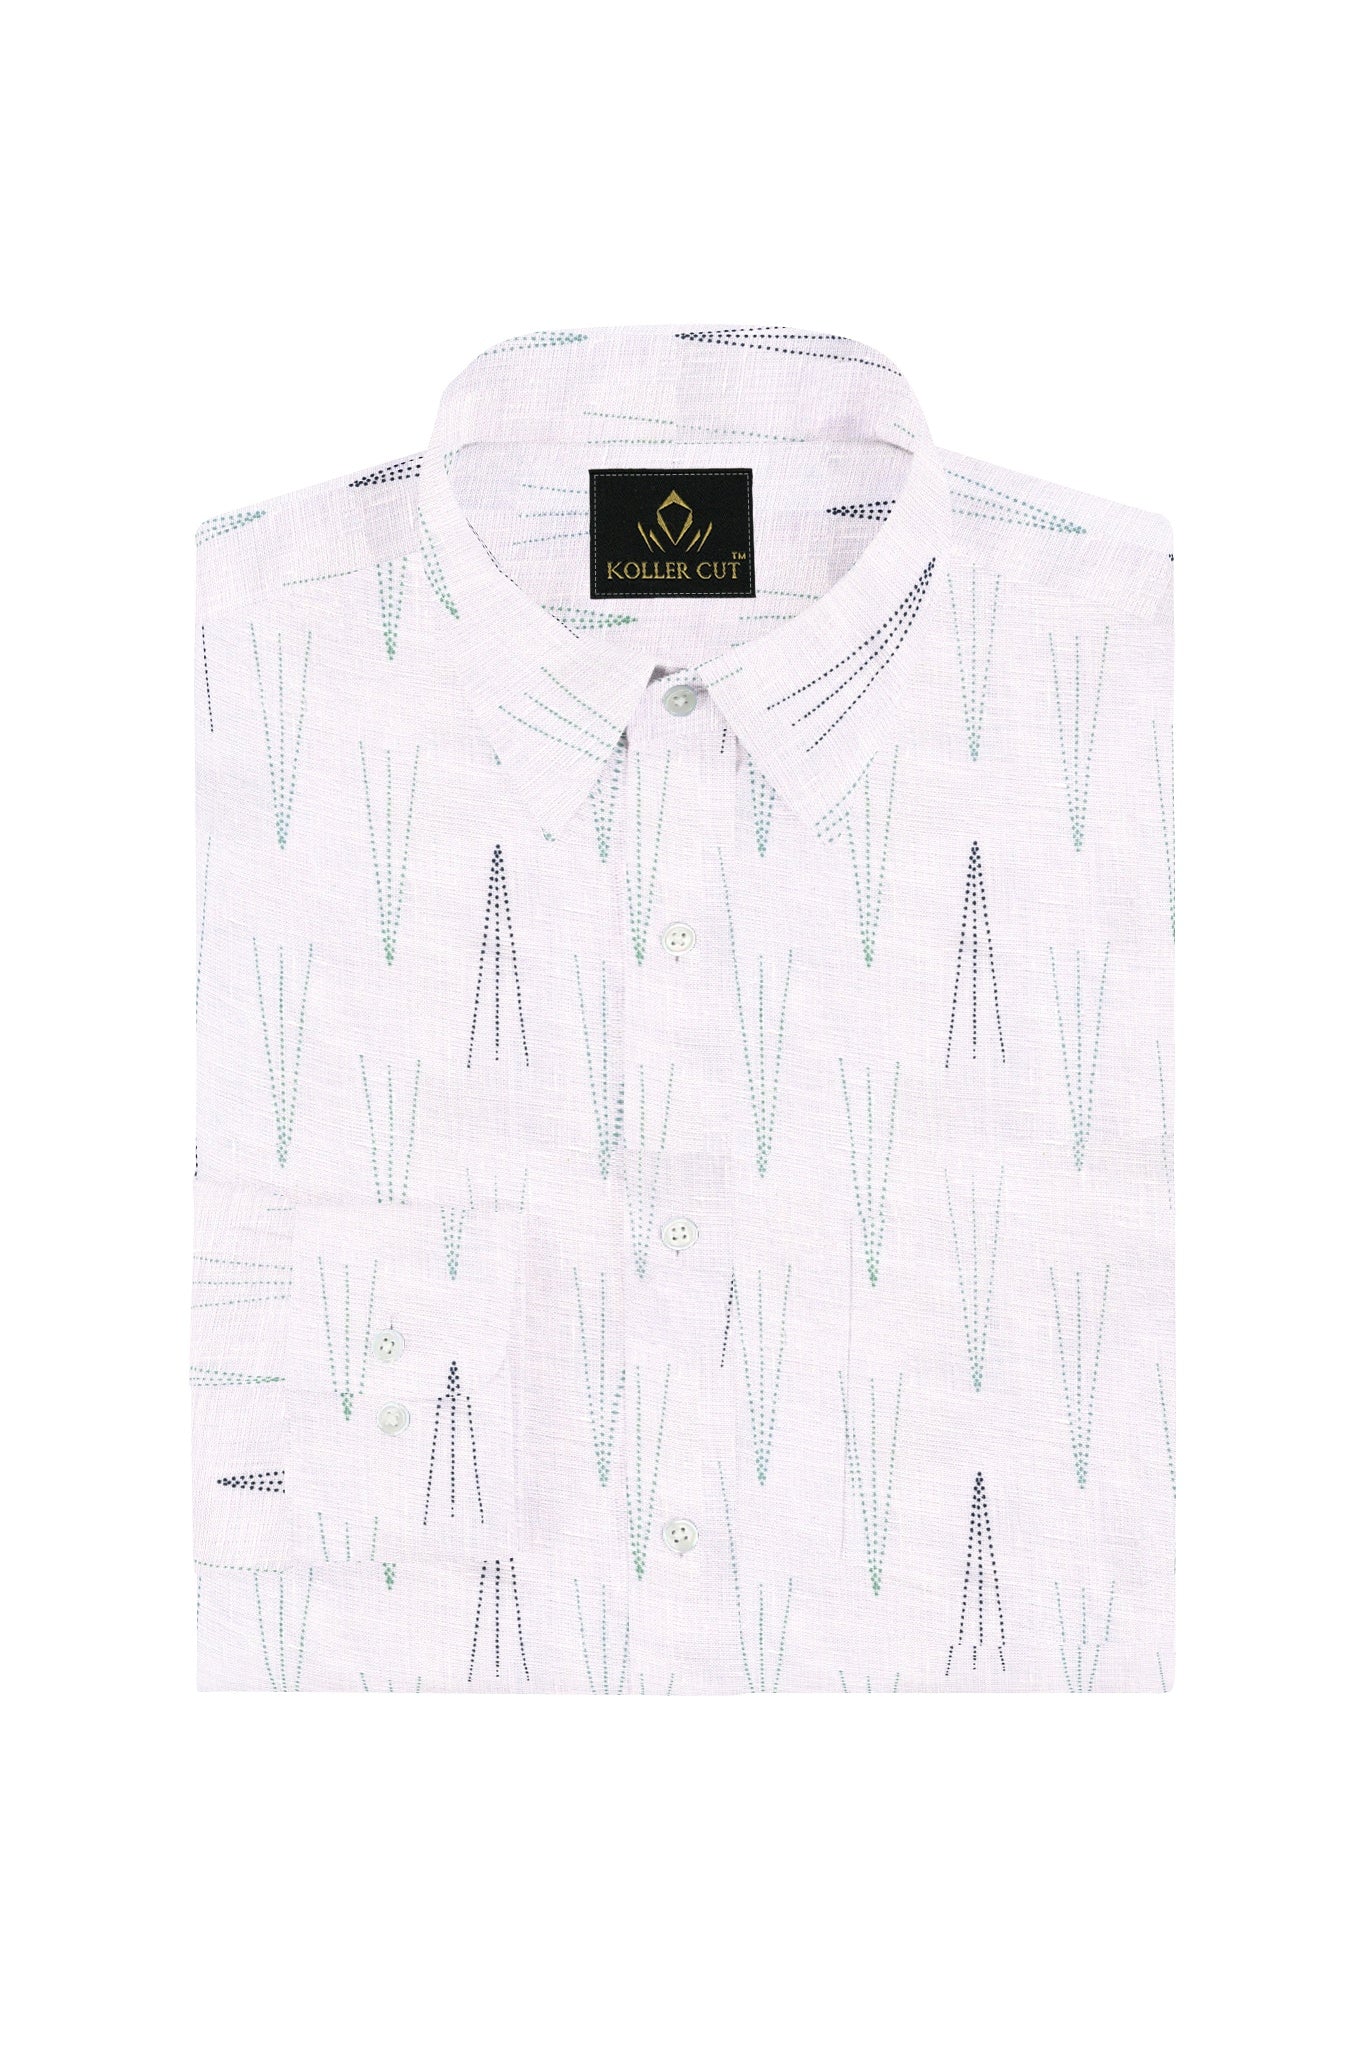 Bright White with Veronese Green and Black Dot Arrowhead Printed Pure Linen Shirt